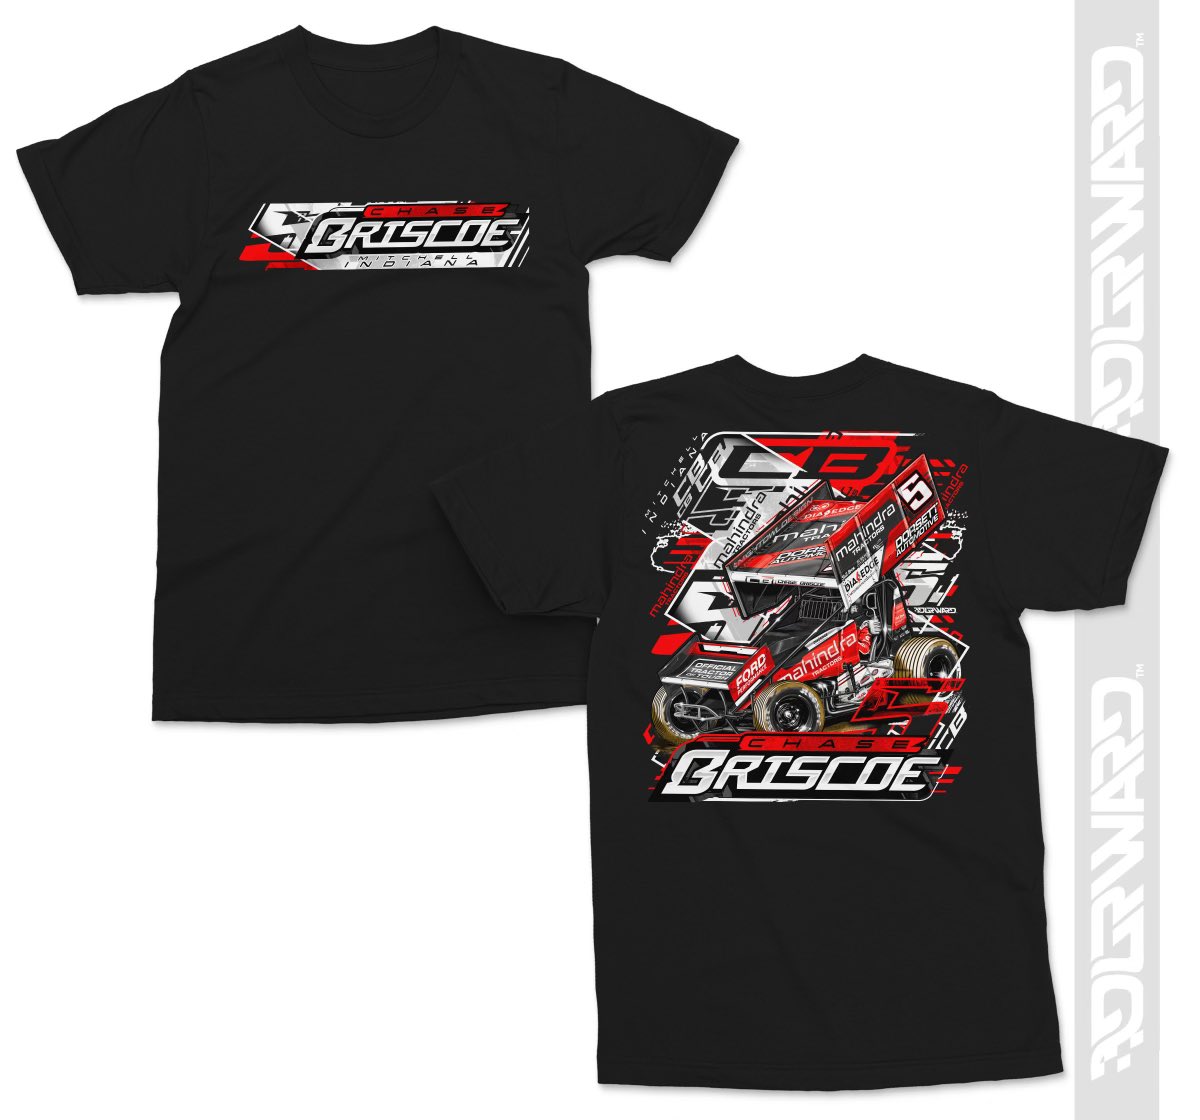 New shirt up on the ChaseBriscoe.com store! Pre-orders only until 11:59 PM on Monday (May 20th). Hope to have them shipped out before the dirt races St. Louis weekend. 👇 chase-briscoe-racing.myshopify.com/products/2024-…